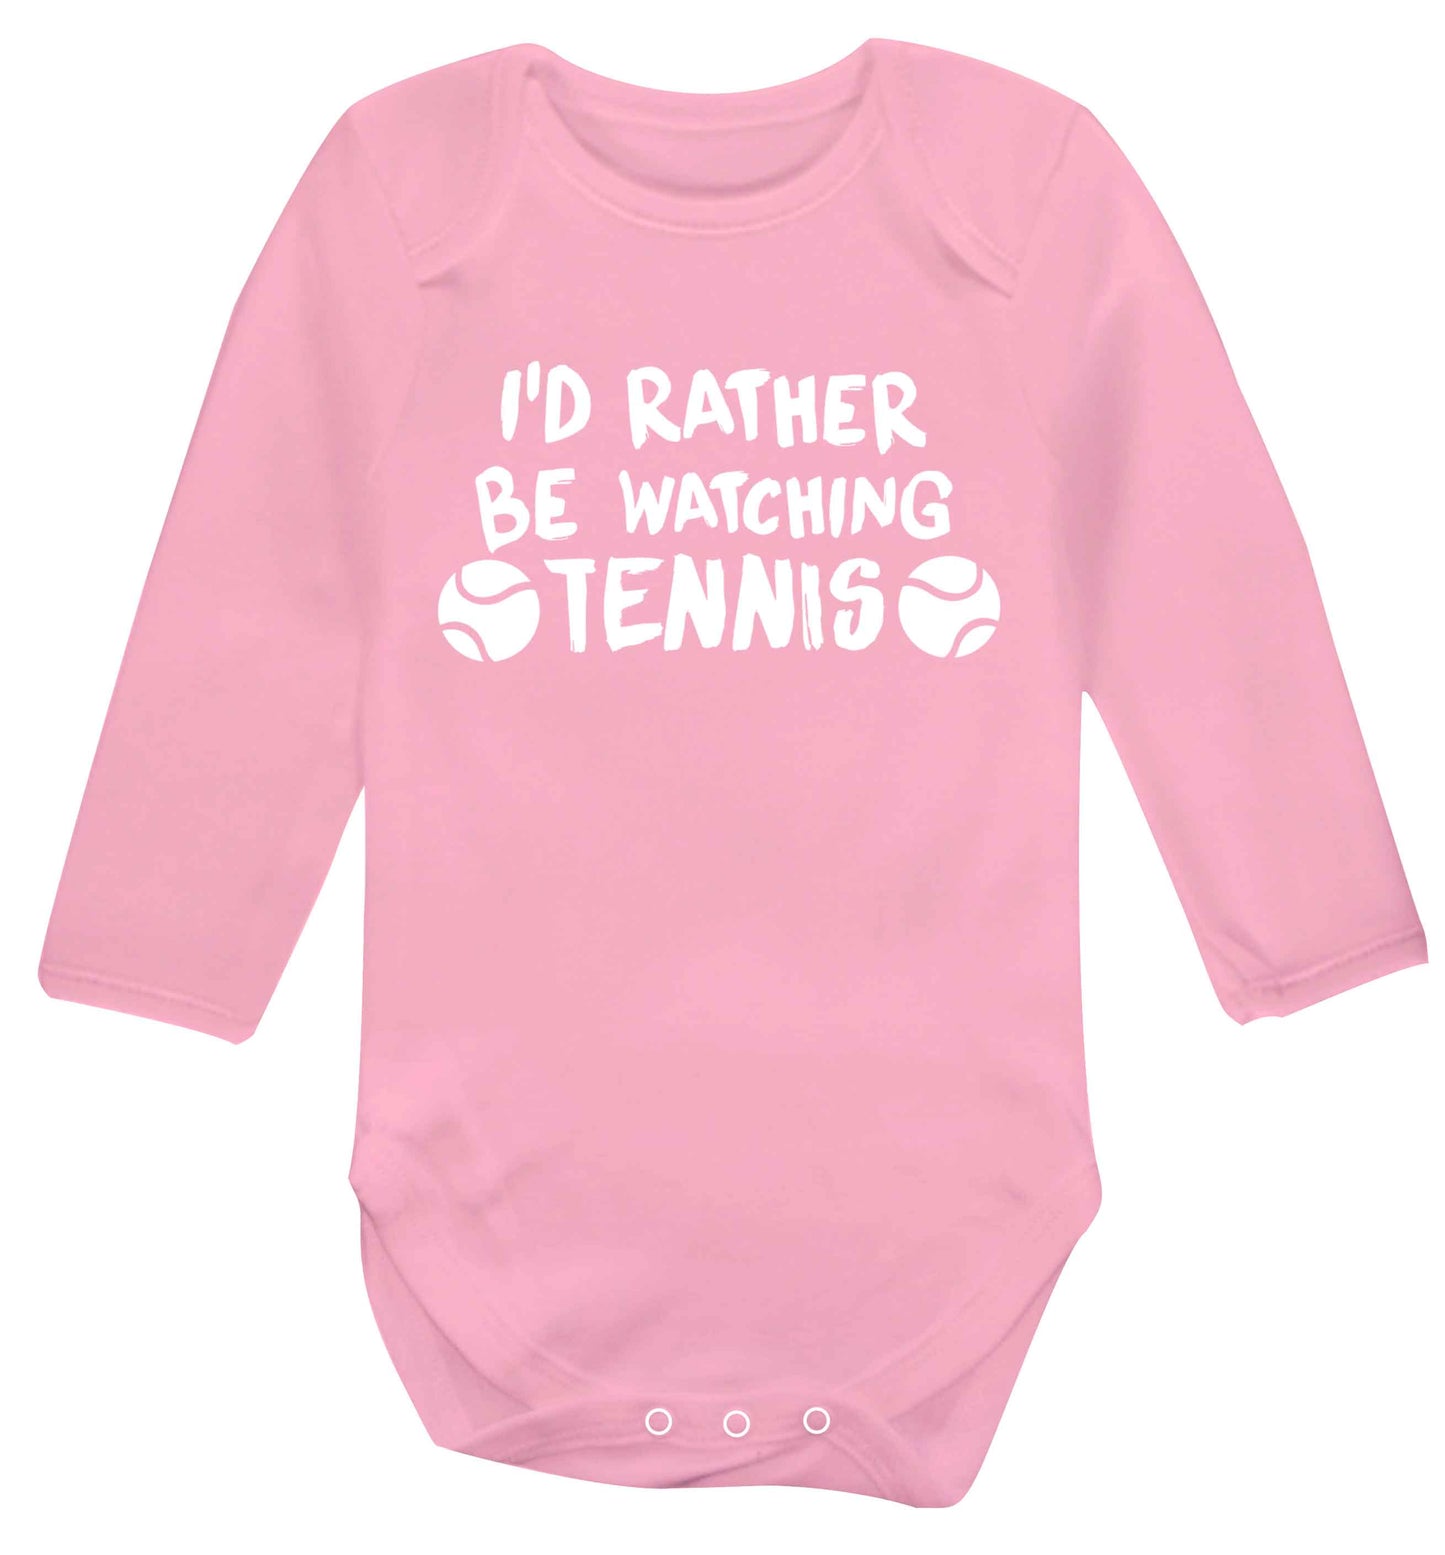 I'd rather be watching the tennis Baby Vest long sleeved pale pink 6-12 months